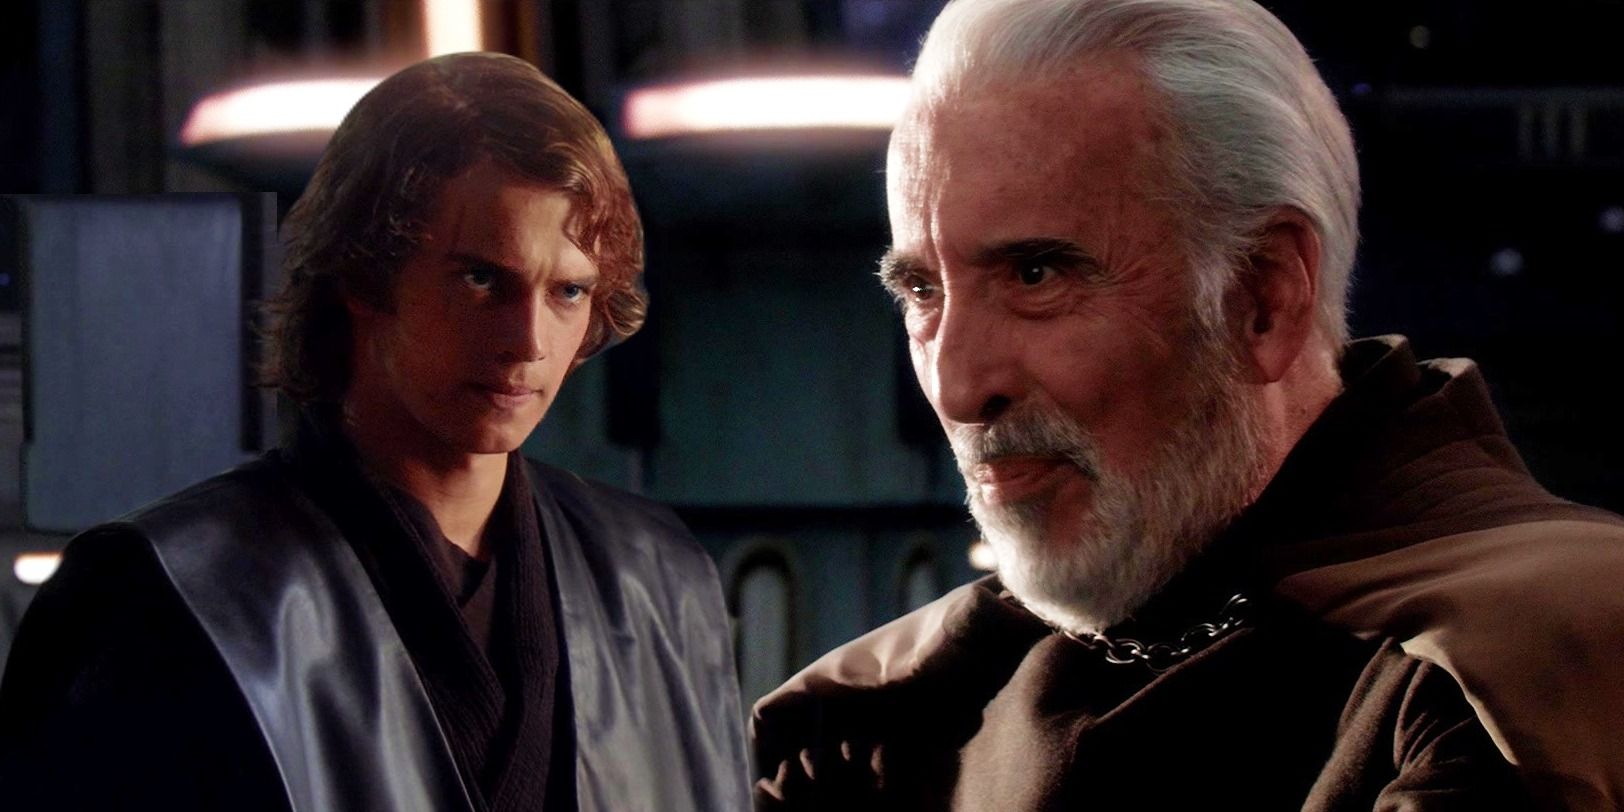 Count Dooku smirking at Anakin to the right and Anakin glaring at Dooku to the left both from Revenge of the Sith in a combined image